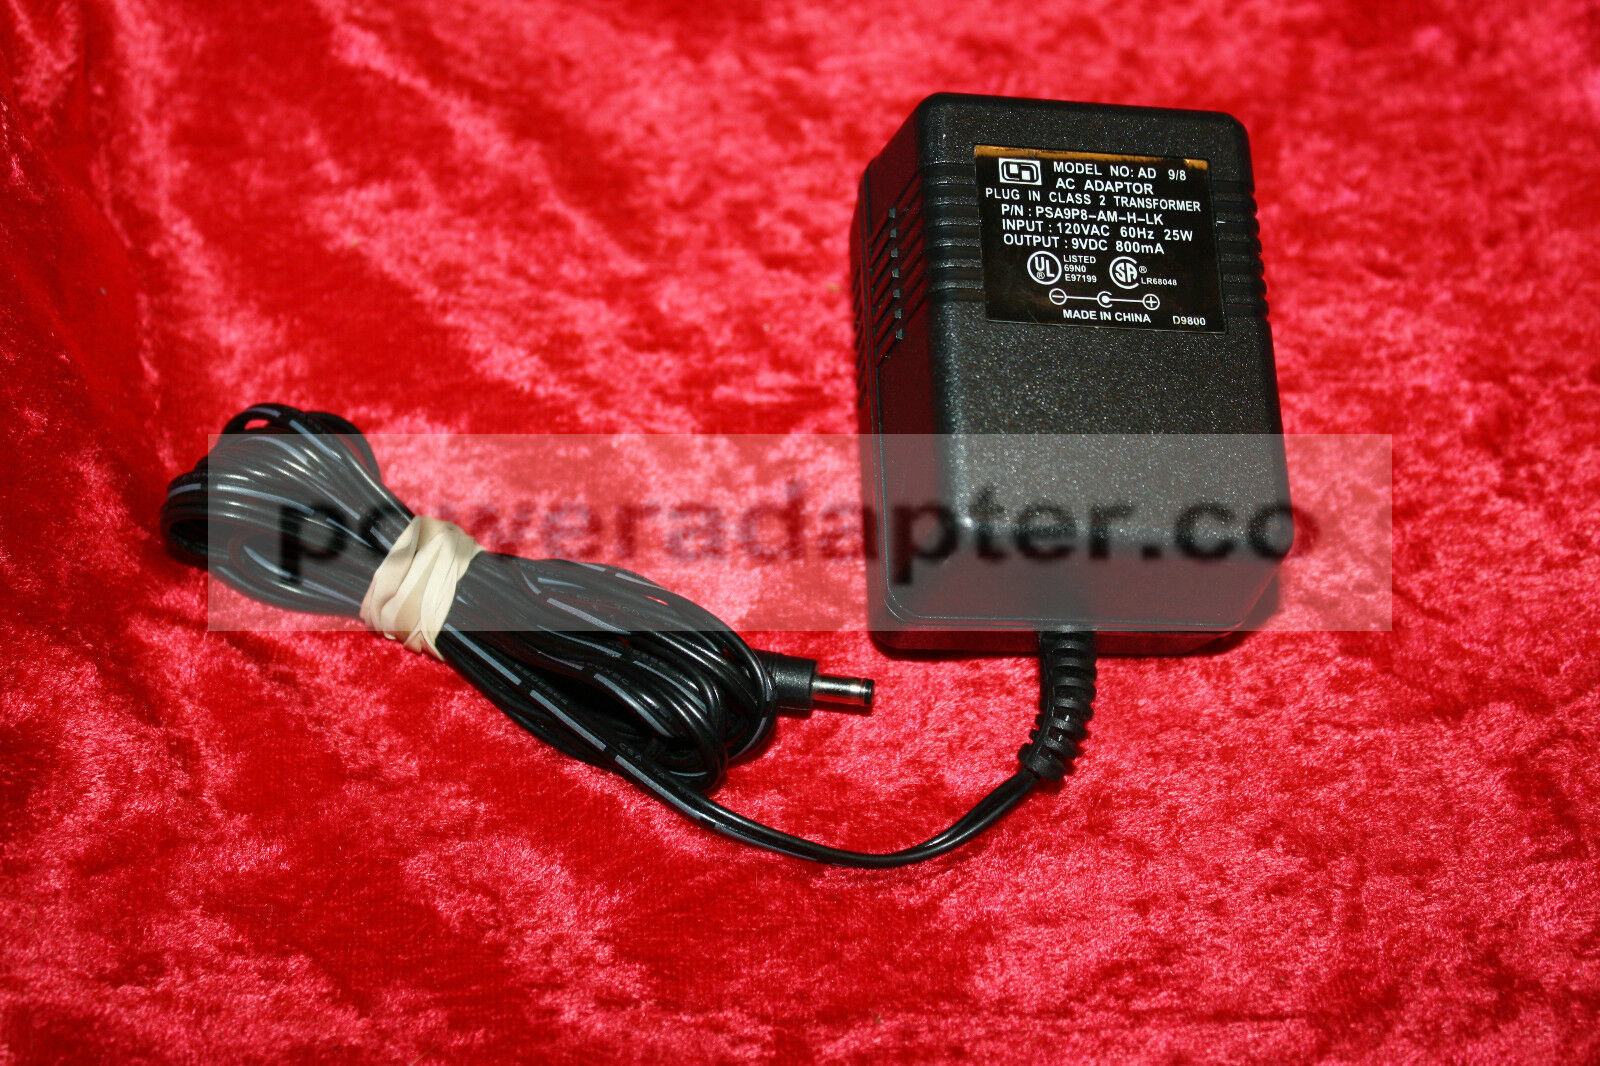 AC ADAPTER AD 9/8 PSA9P8-AM-H-LK Condition: Used: An item that has been used previously. The item may have some sign